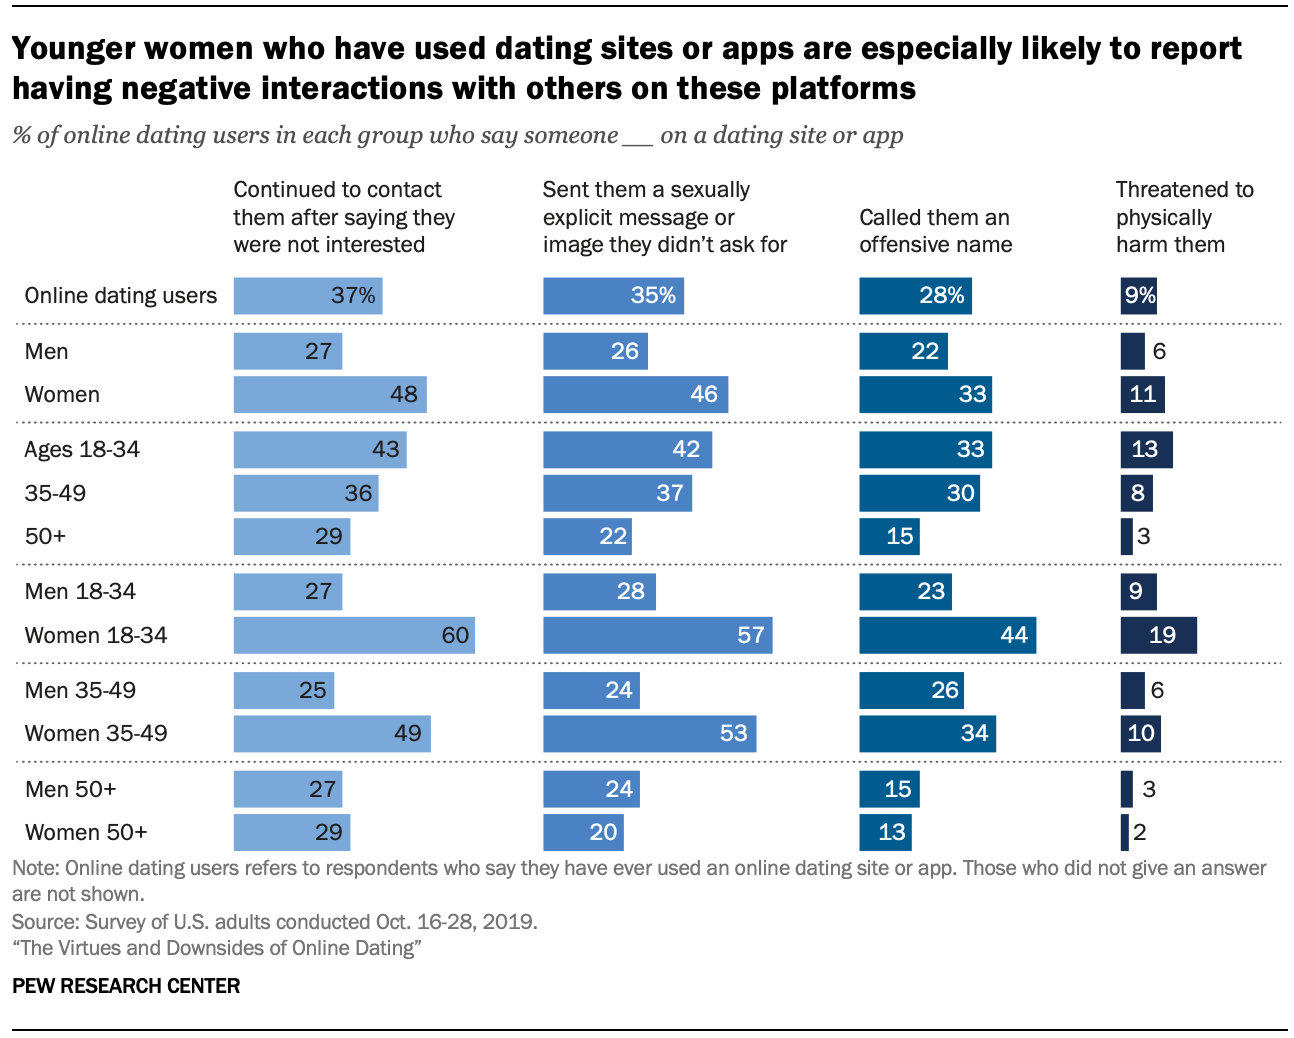 Chart shows younger women who have used dating sites or apps are especially likely to report having negative interactions with others on these platforms